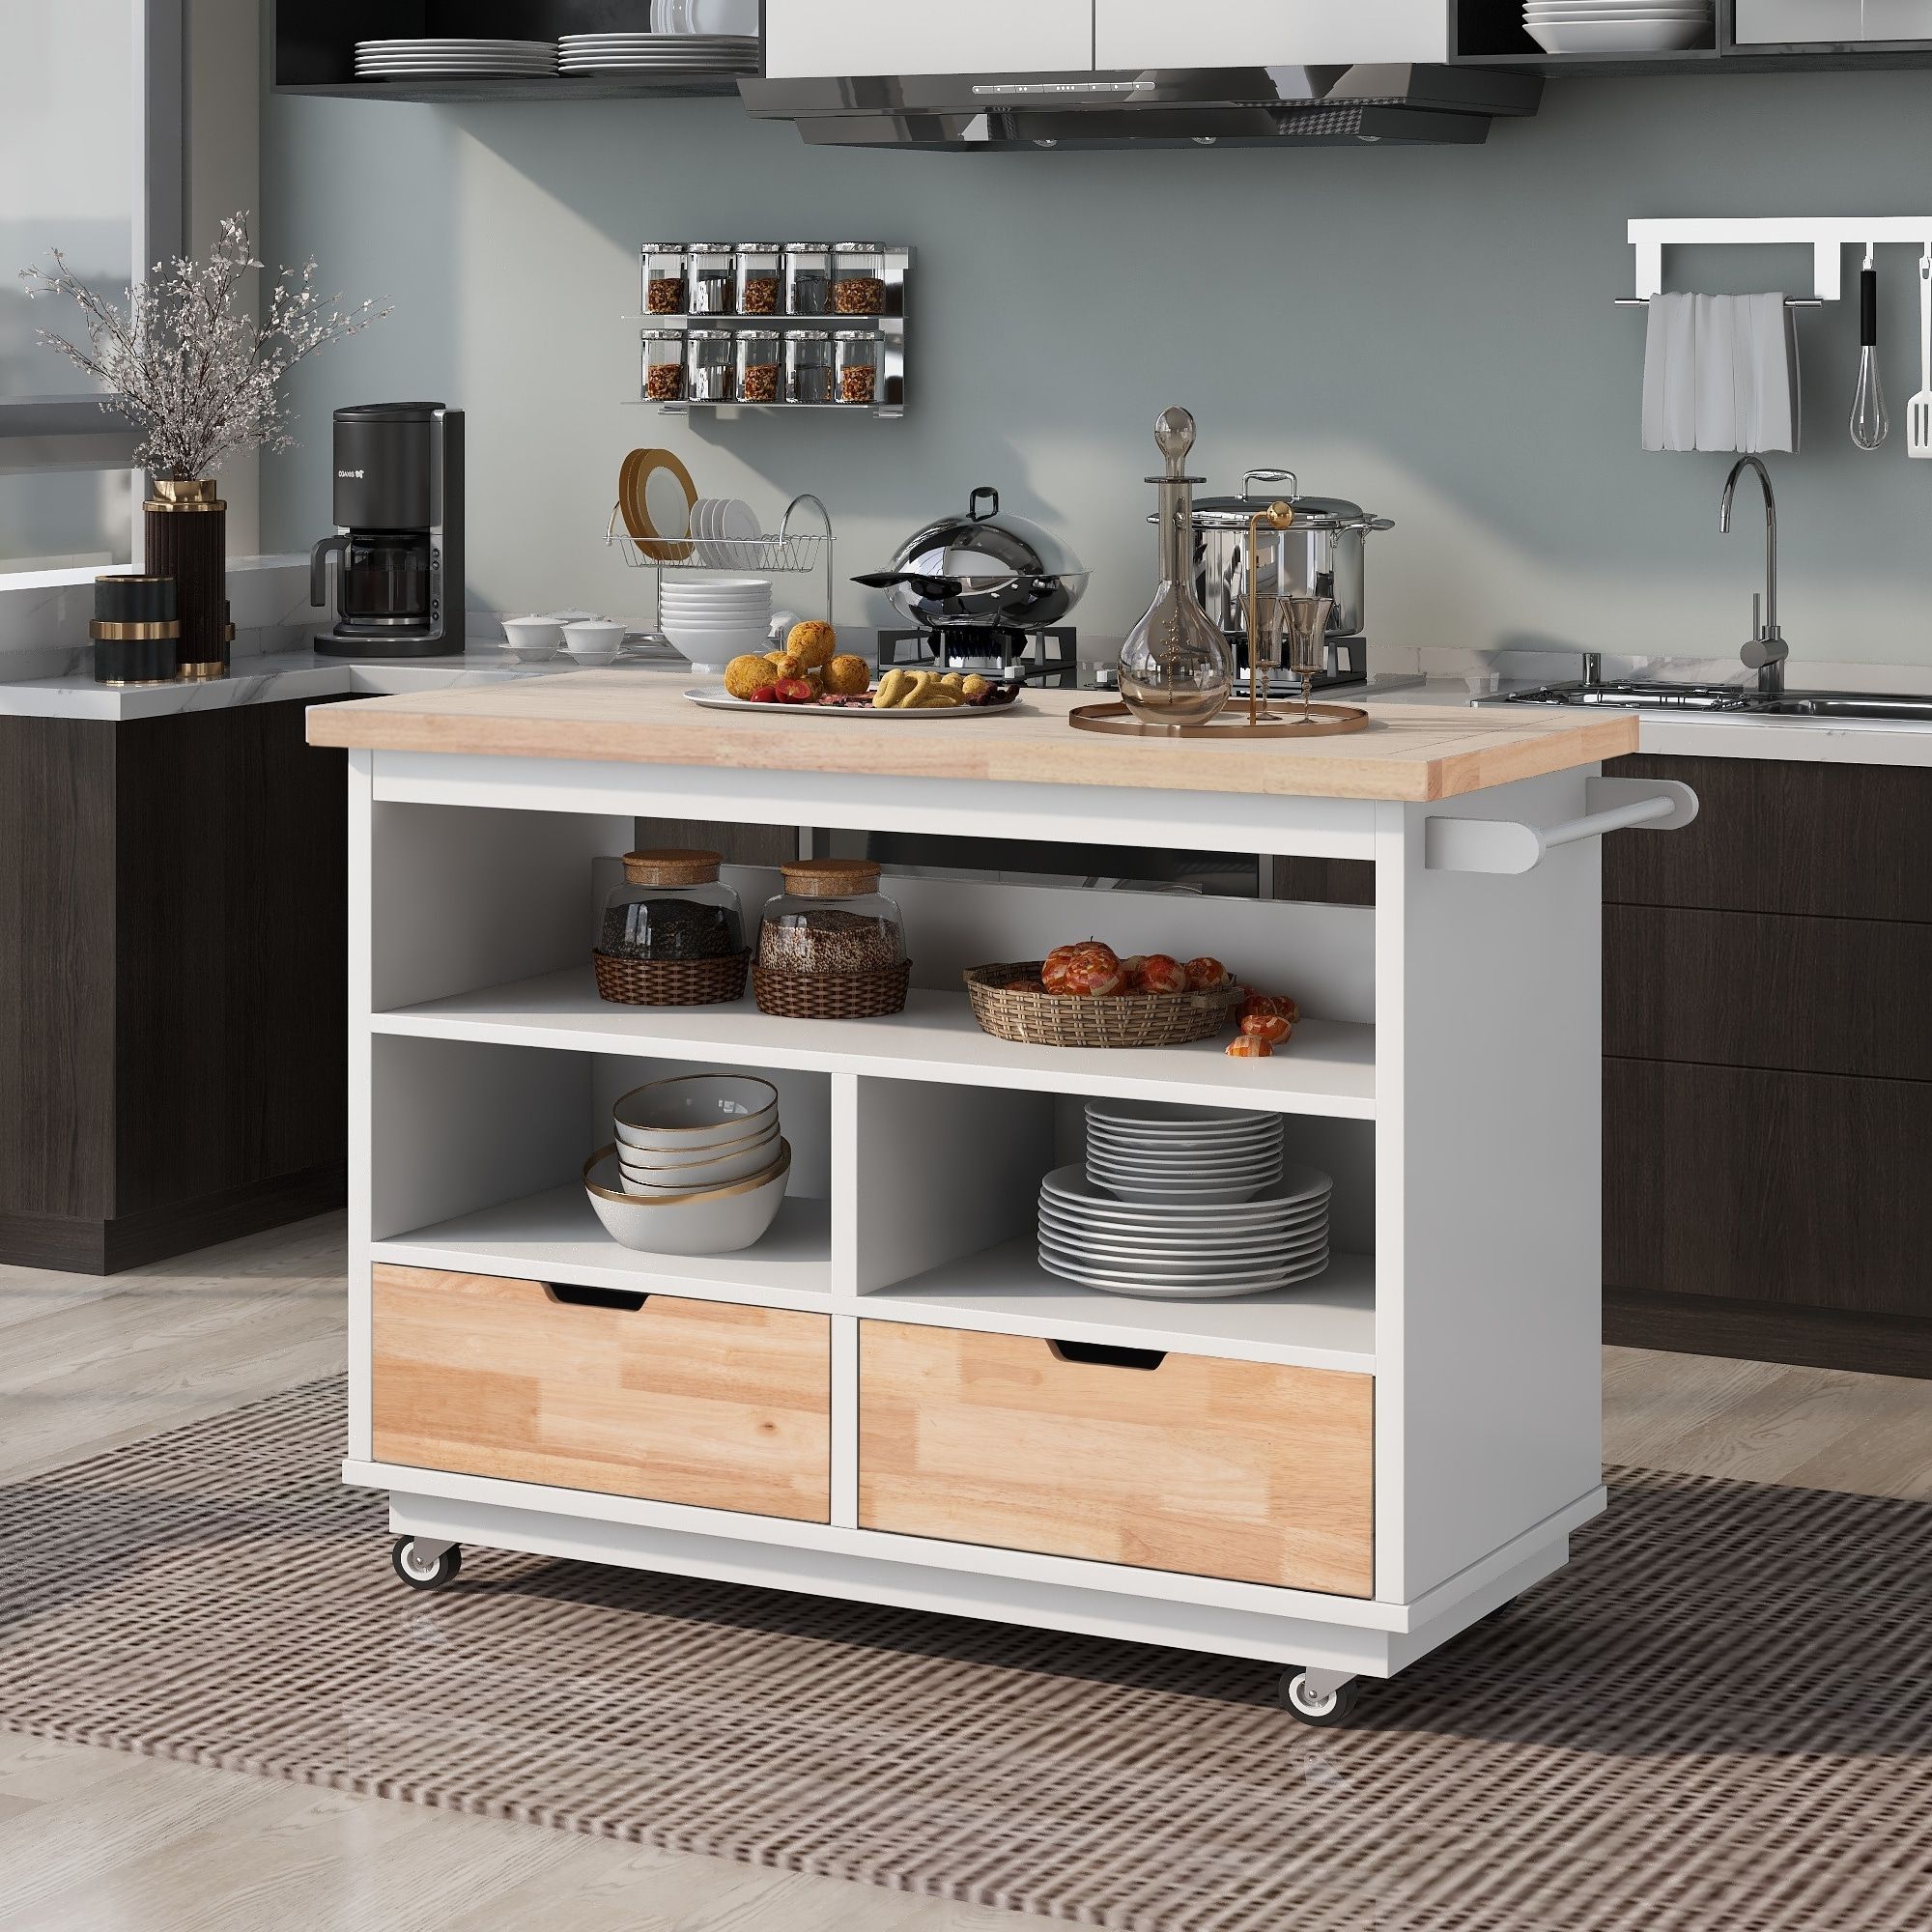 The Versatility of Mobile Kitchen Islands